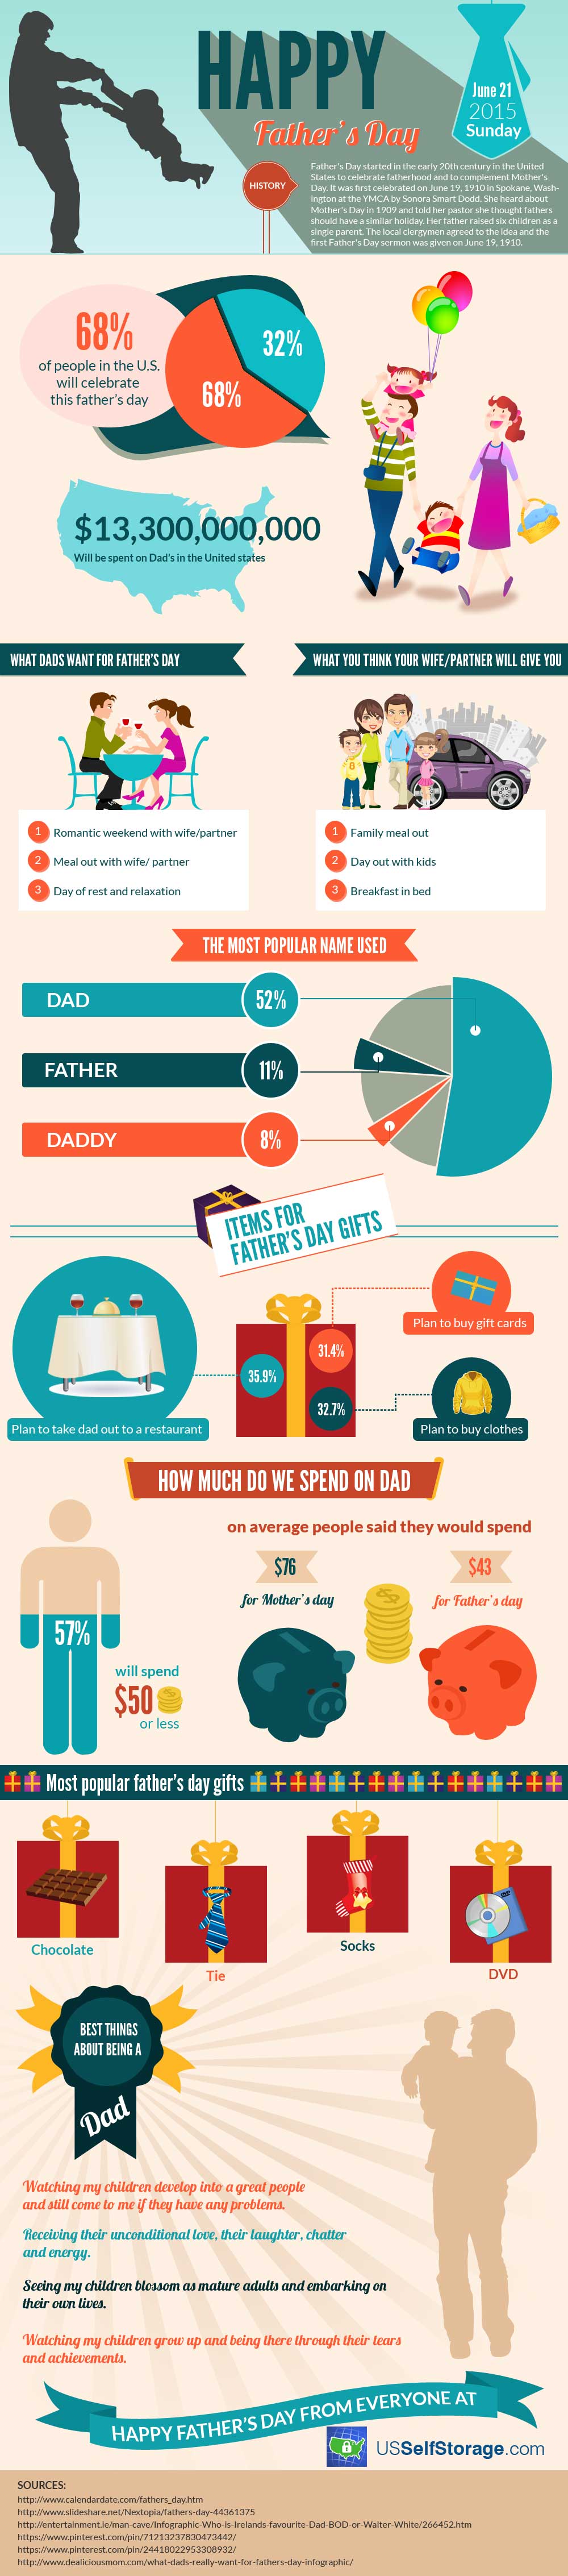 Happy Father's Day Infographic